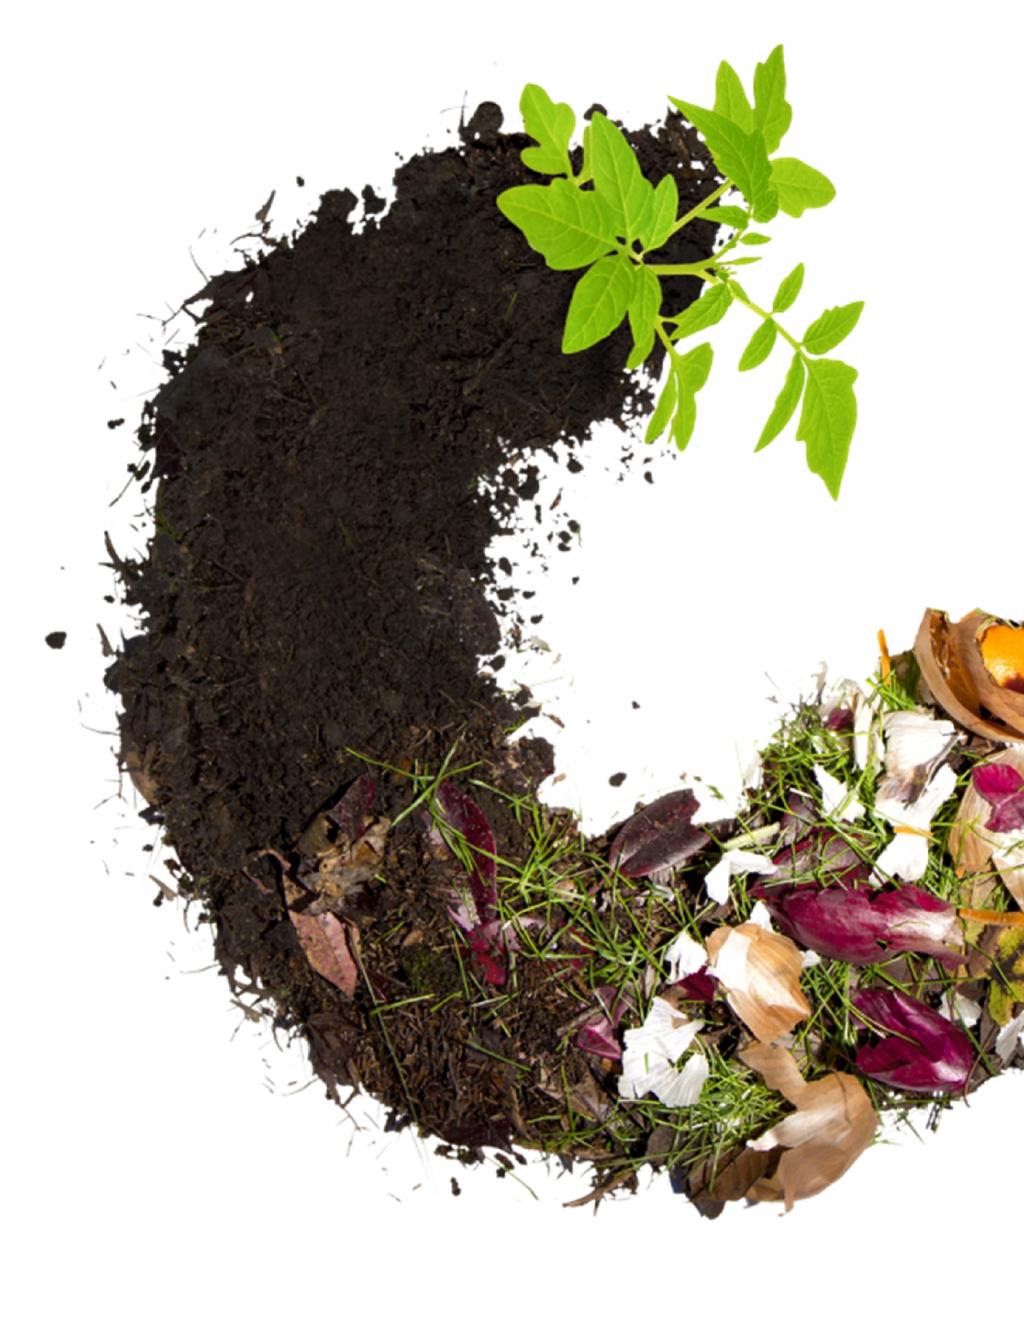 Residential Compost Program Review Key considerations